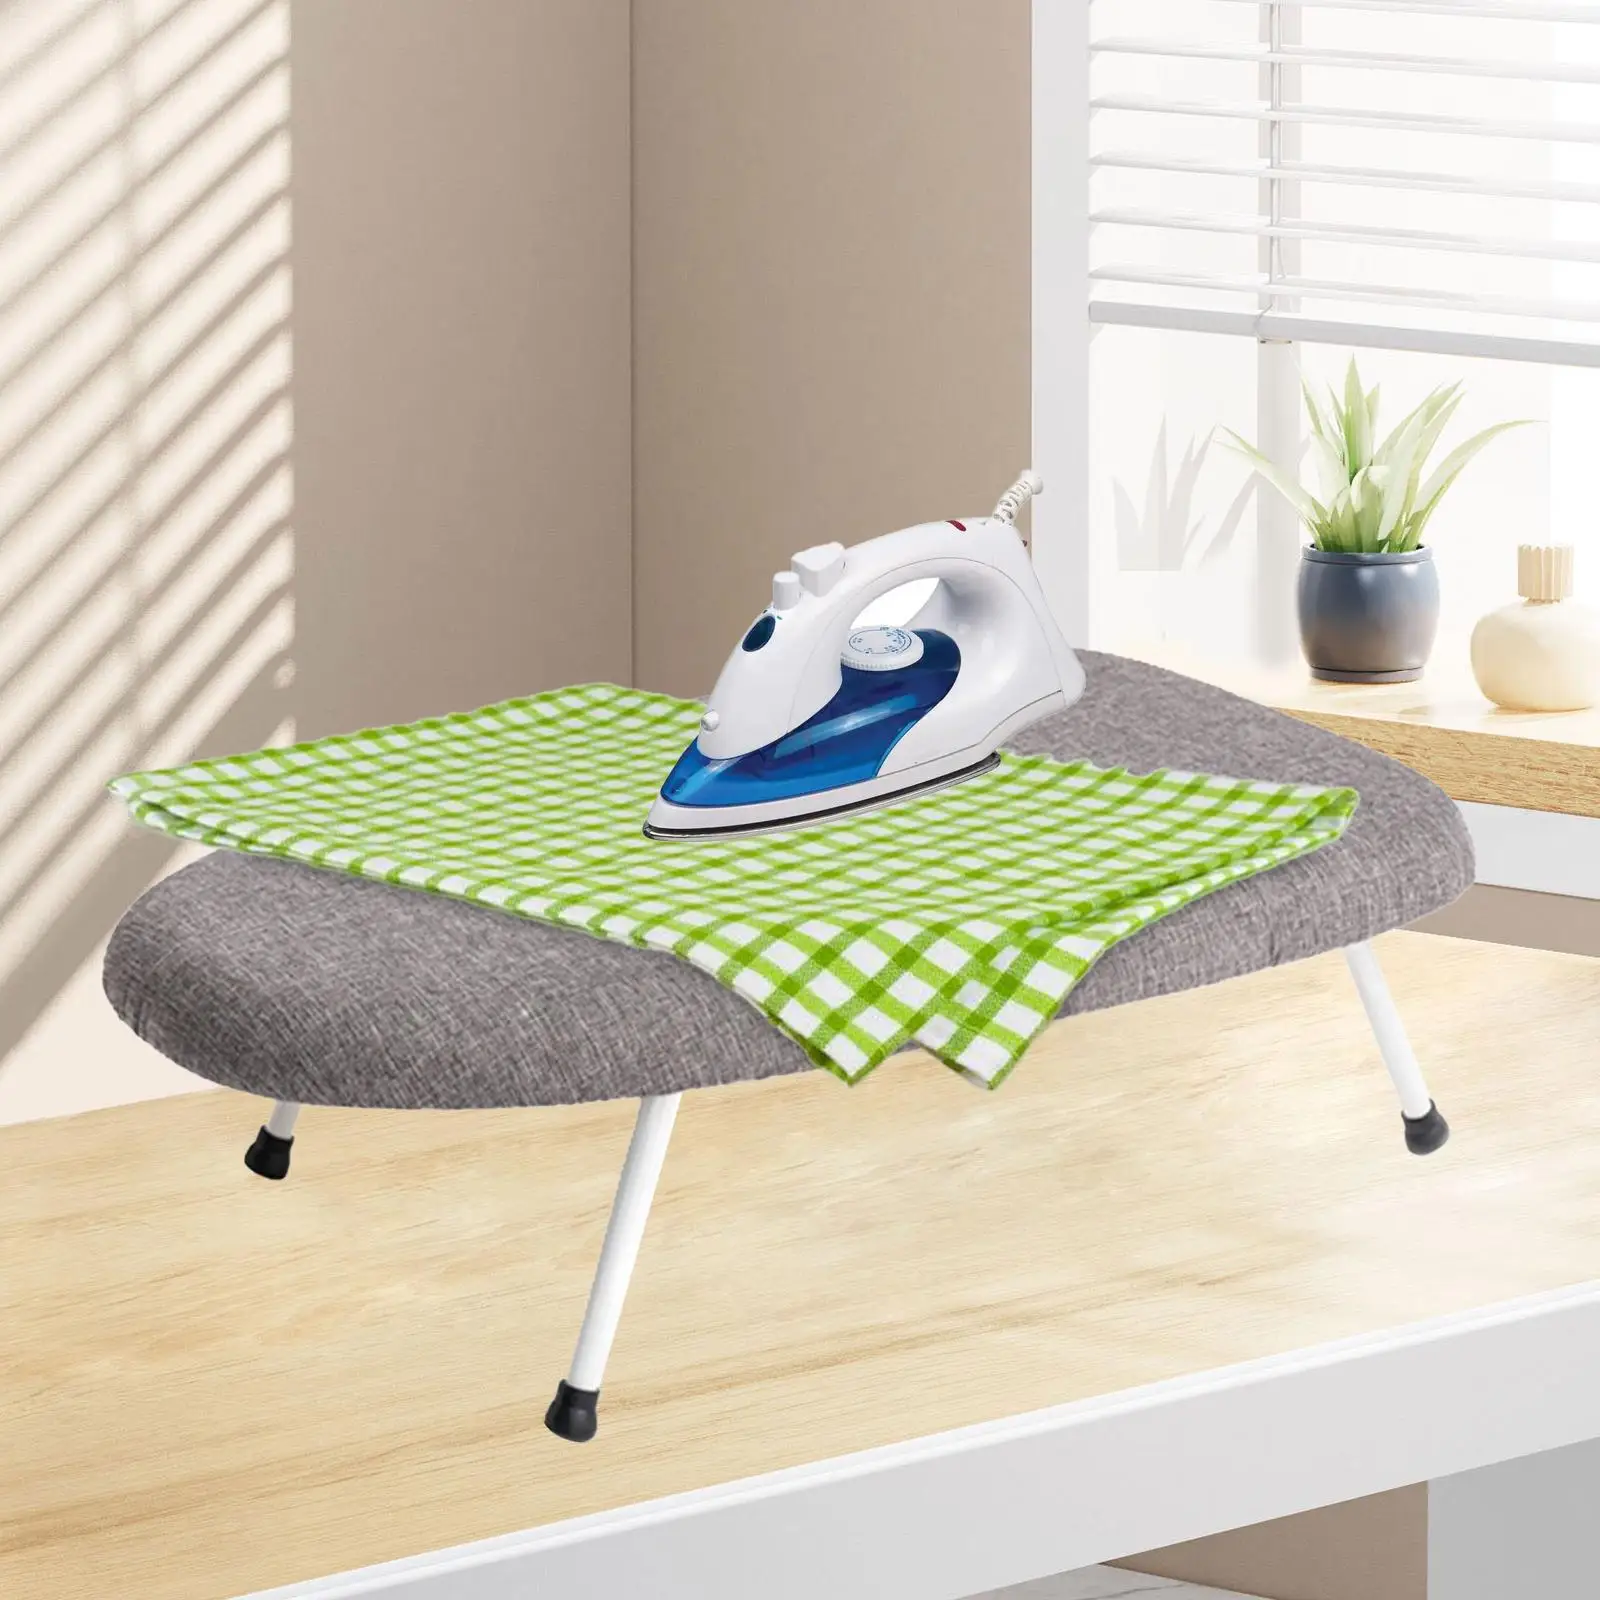 Mini Ironing Board Heavy Duty Non Slip Compact Small Iron Board with Folding Legs for Travel Laundry Room Dorm Sewing Room Cuffs